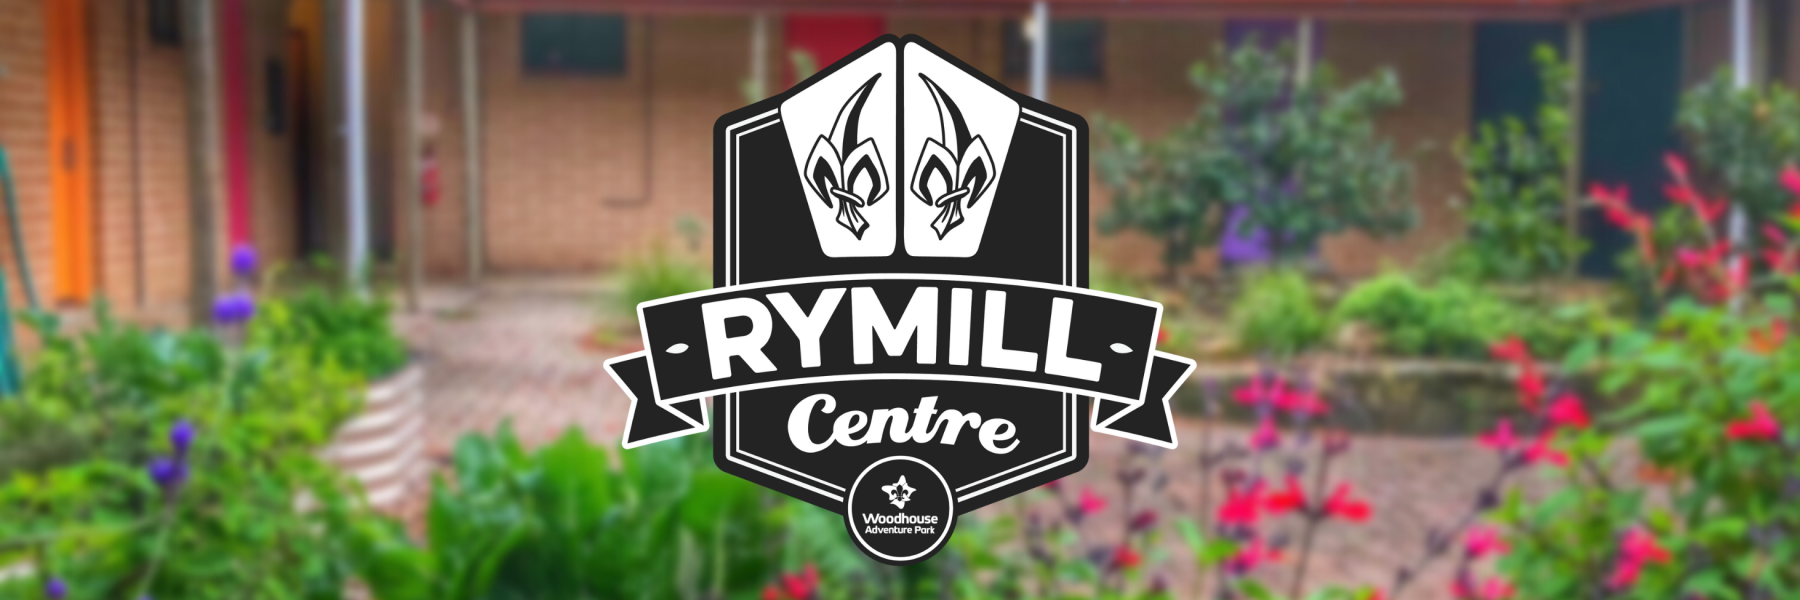 Rymill Centre Banner